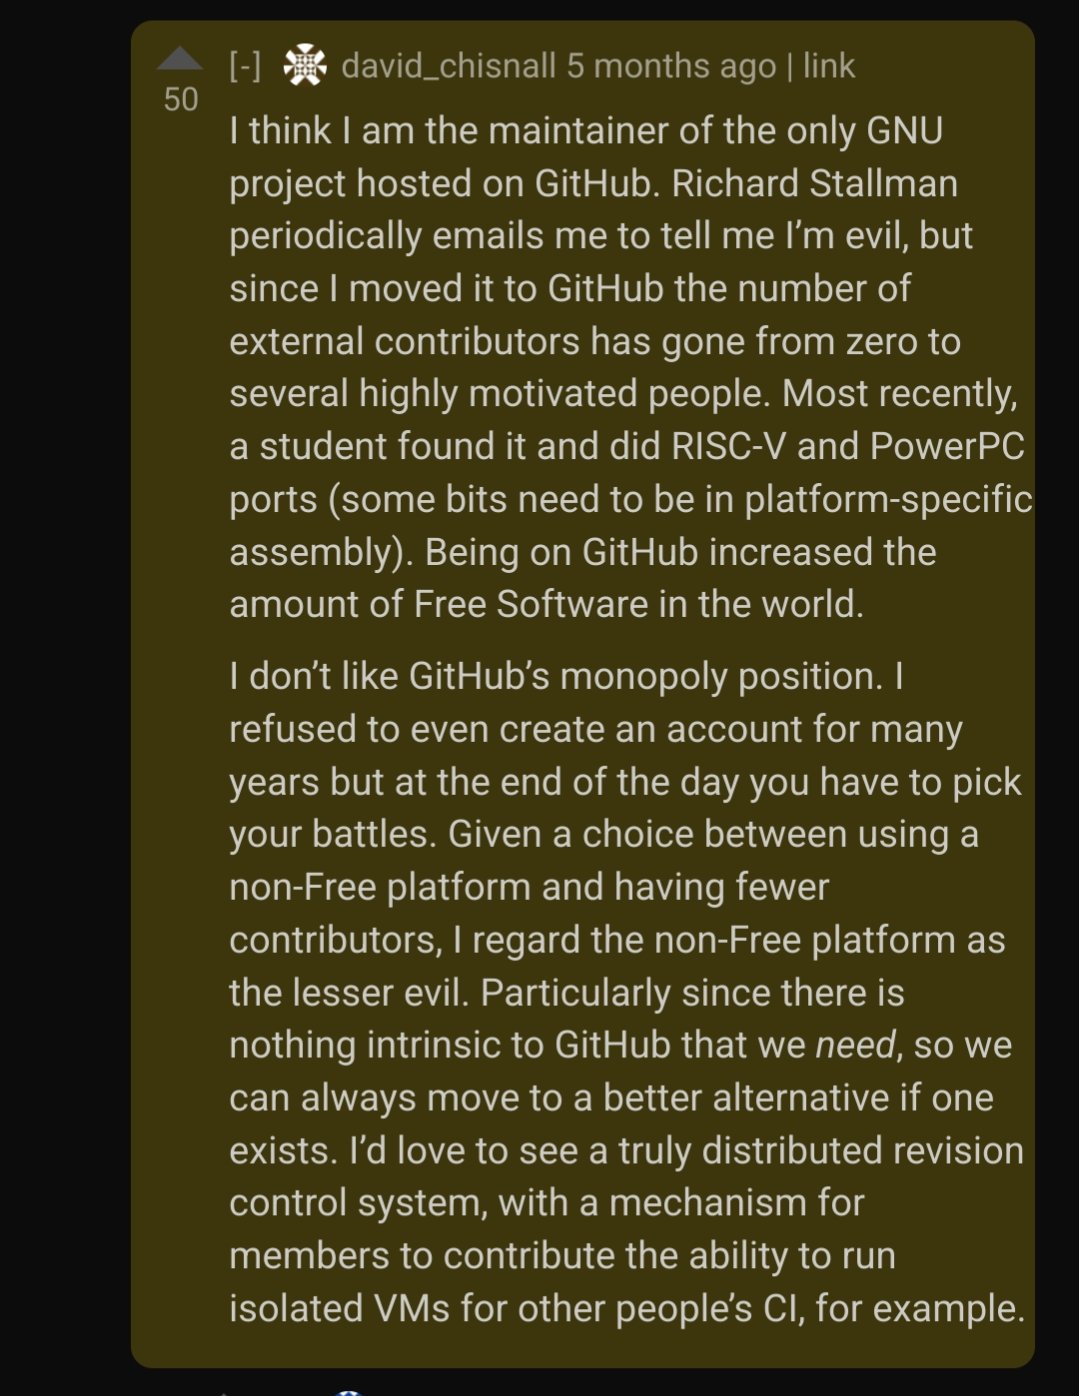 A person who uses github to host a GNU project